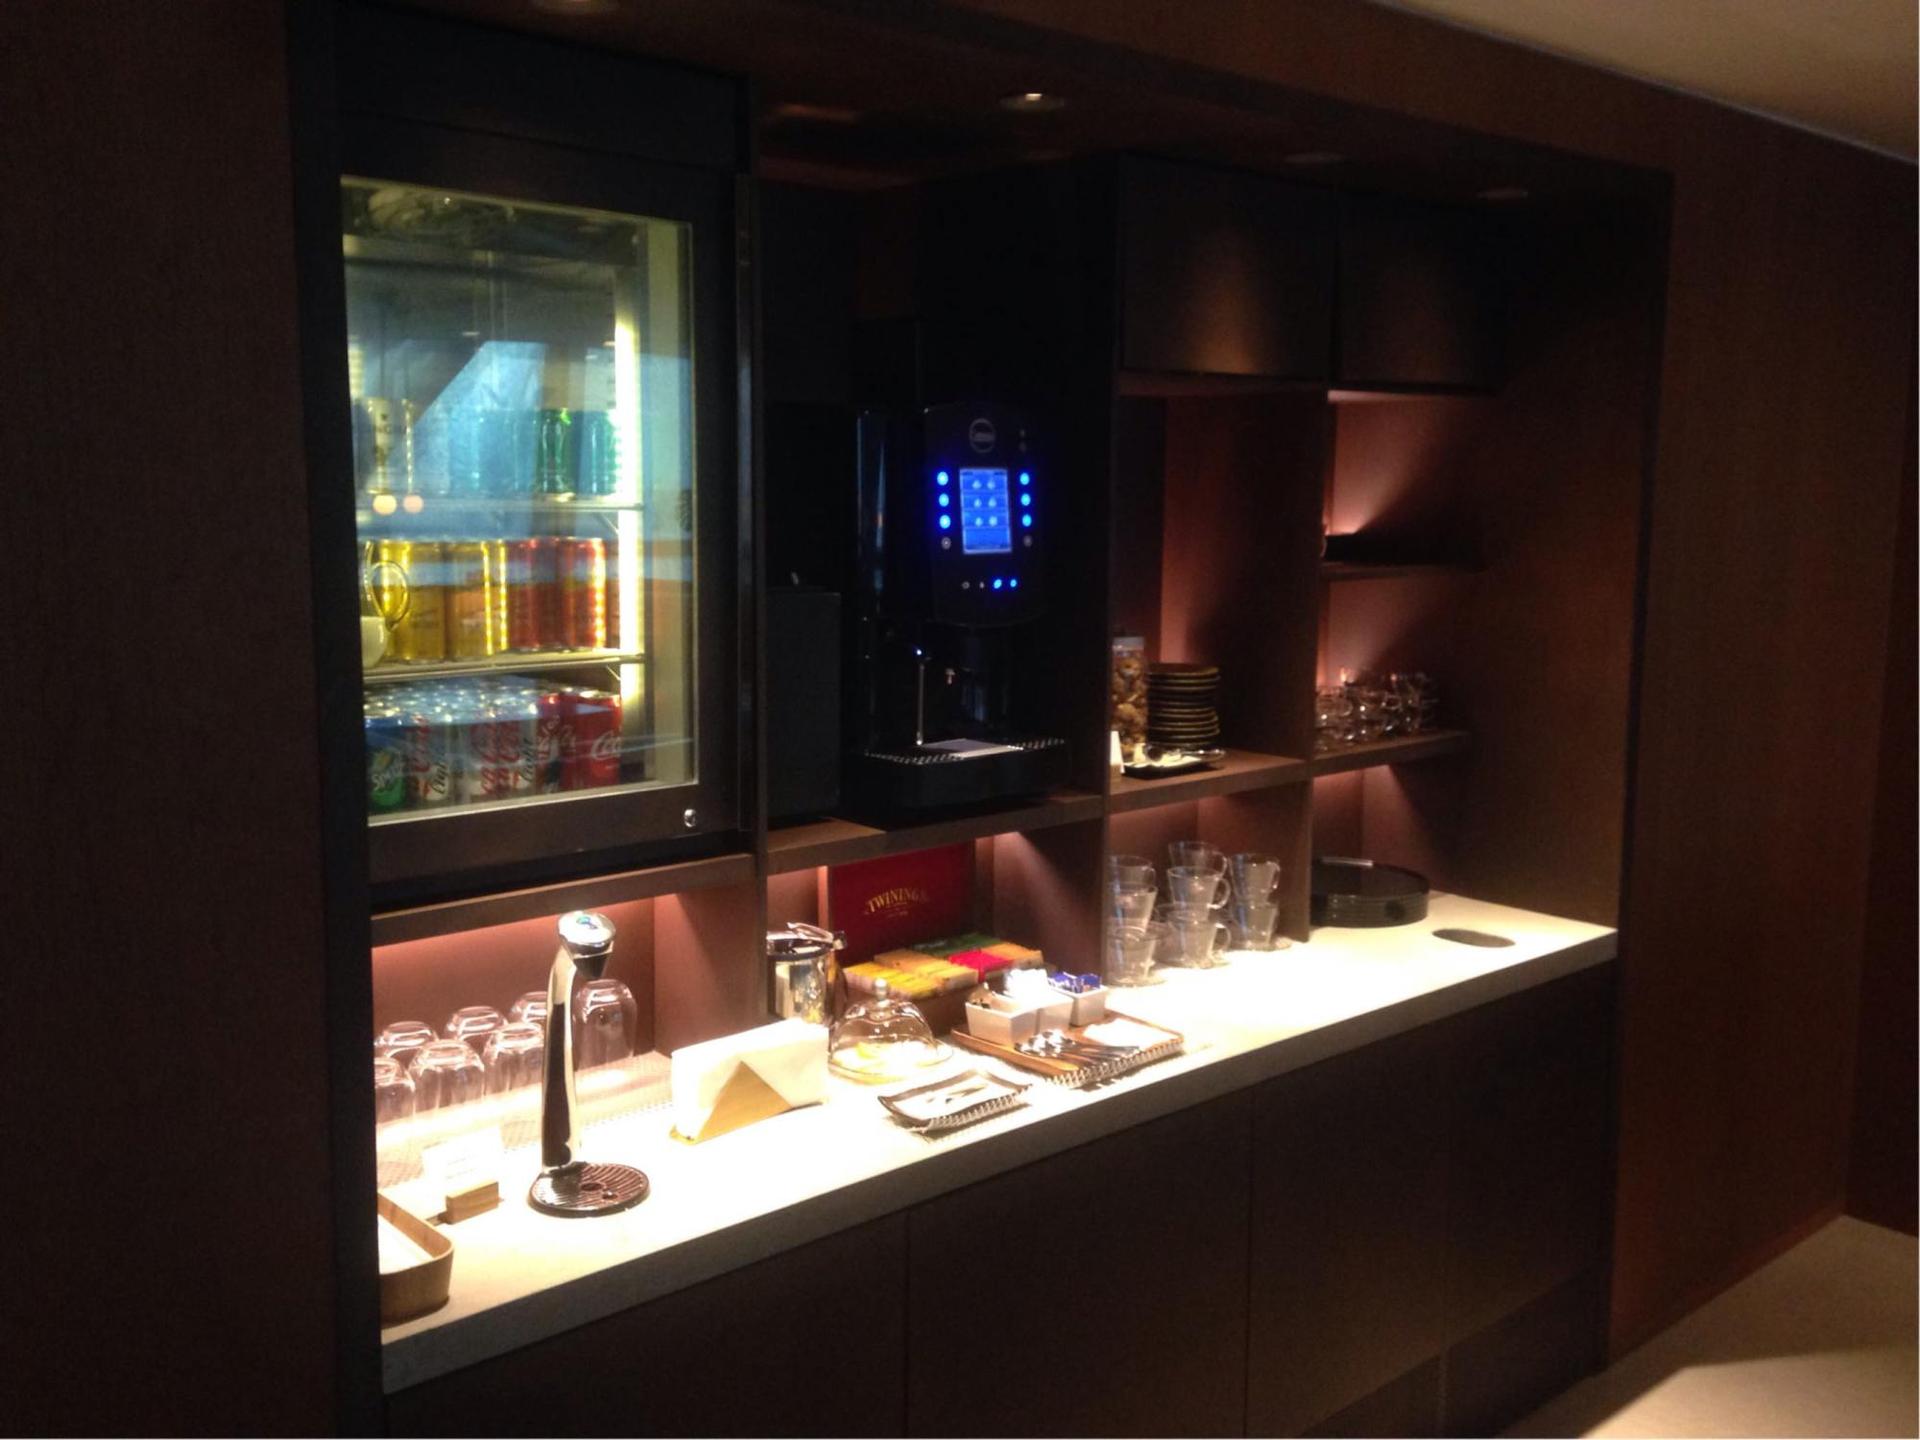 Cathay Pacific First and Business Class Lounge image 11 of 69